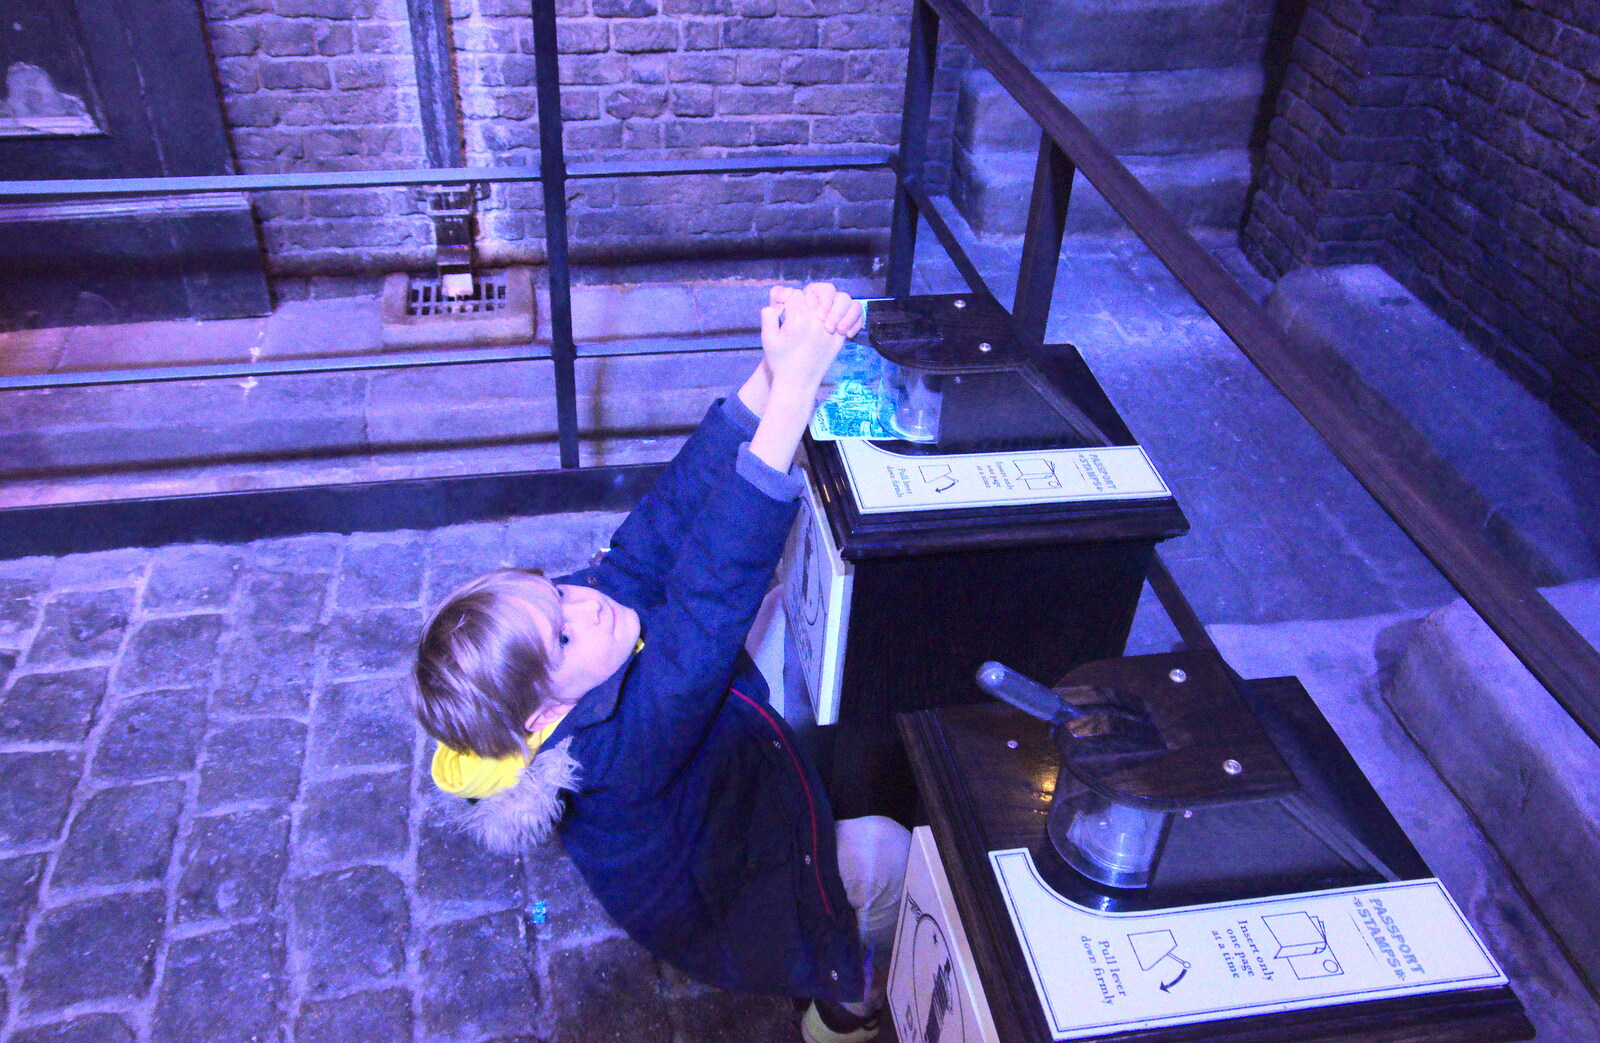 Harry presses his passport from A Trip to Harry Potter World, Leavesden, Hertfordshire - 16th February 2020